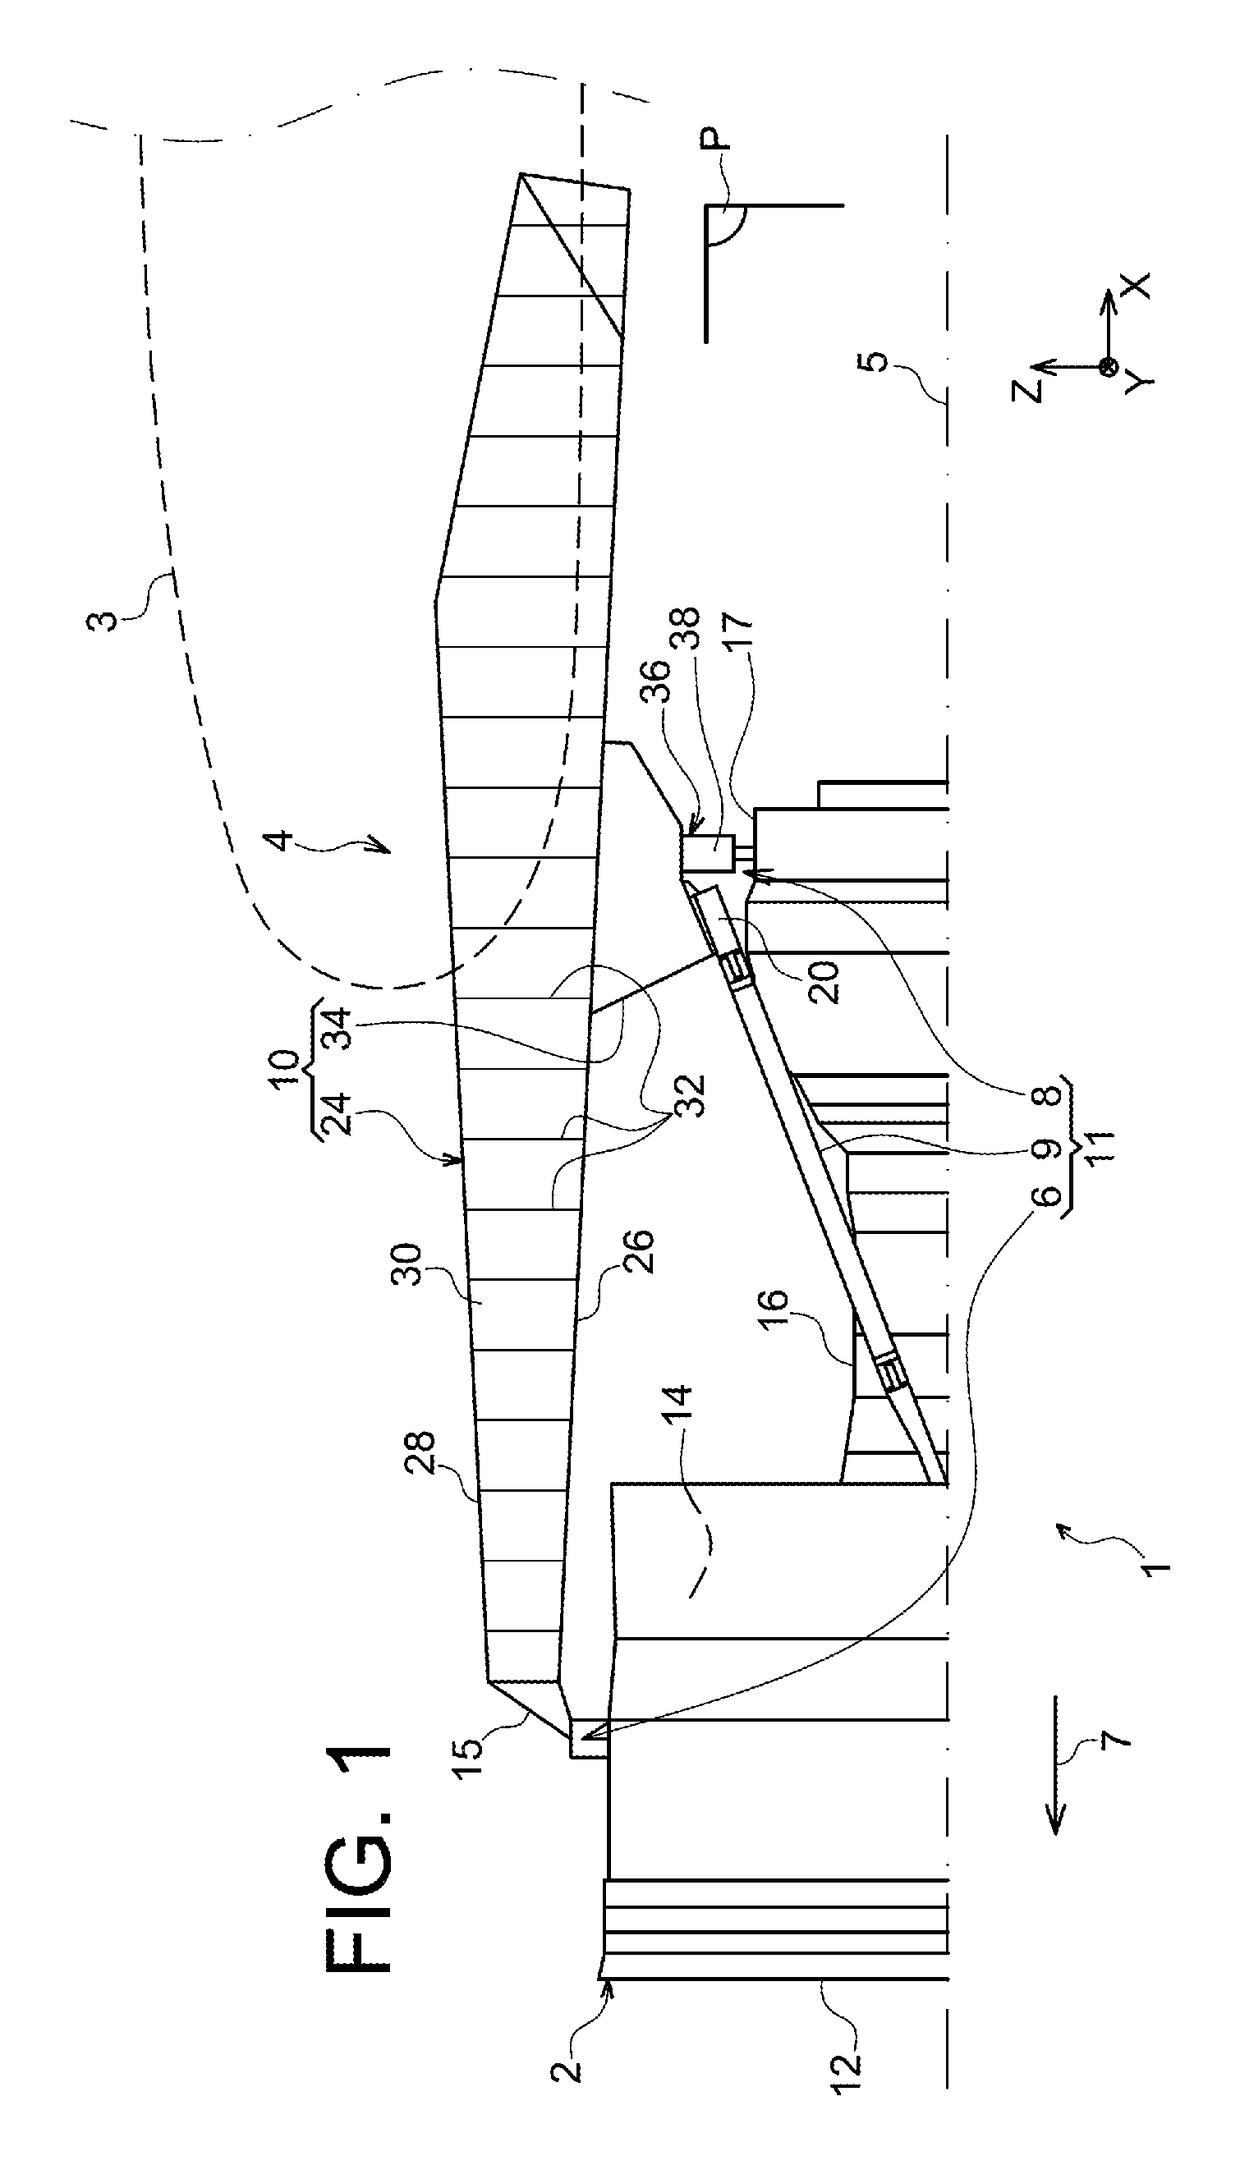 Aircraft propelling assembly including a duct forming a thermal barrier integrated in the caisson of the rigid structure of the engine mounting system